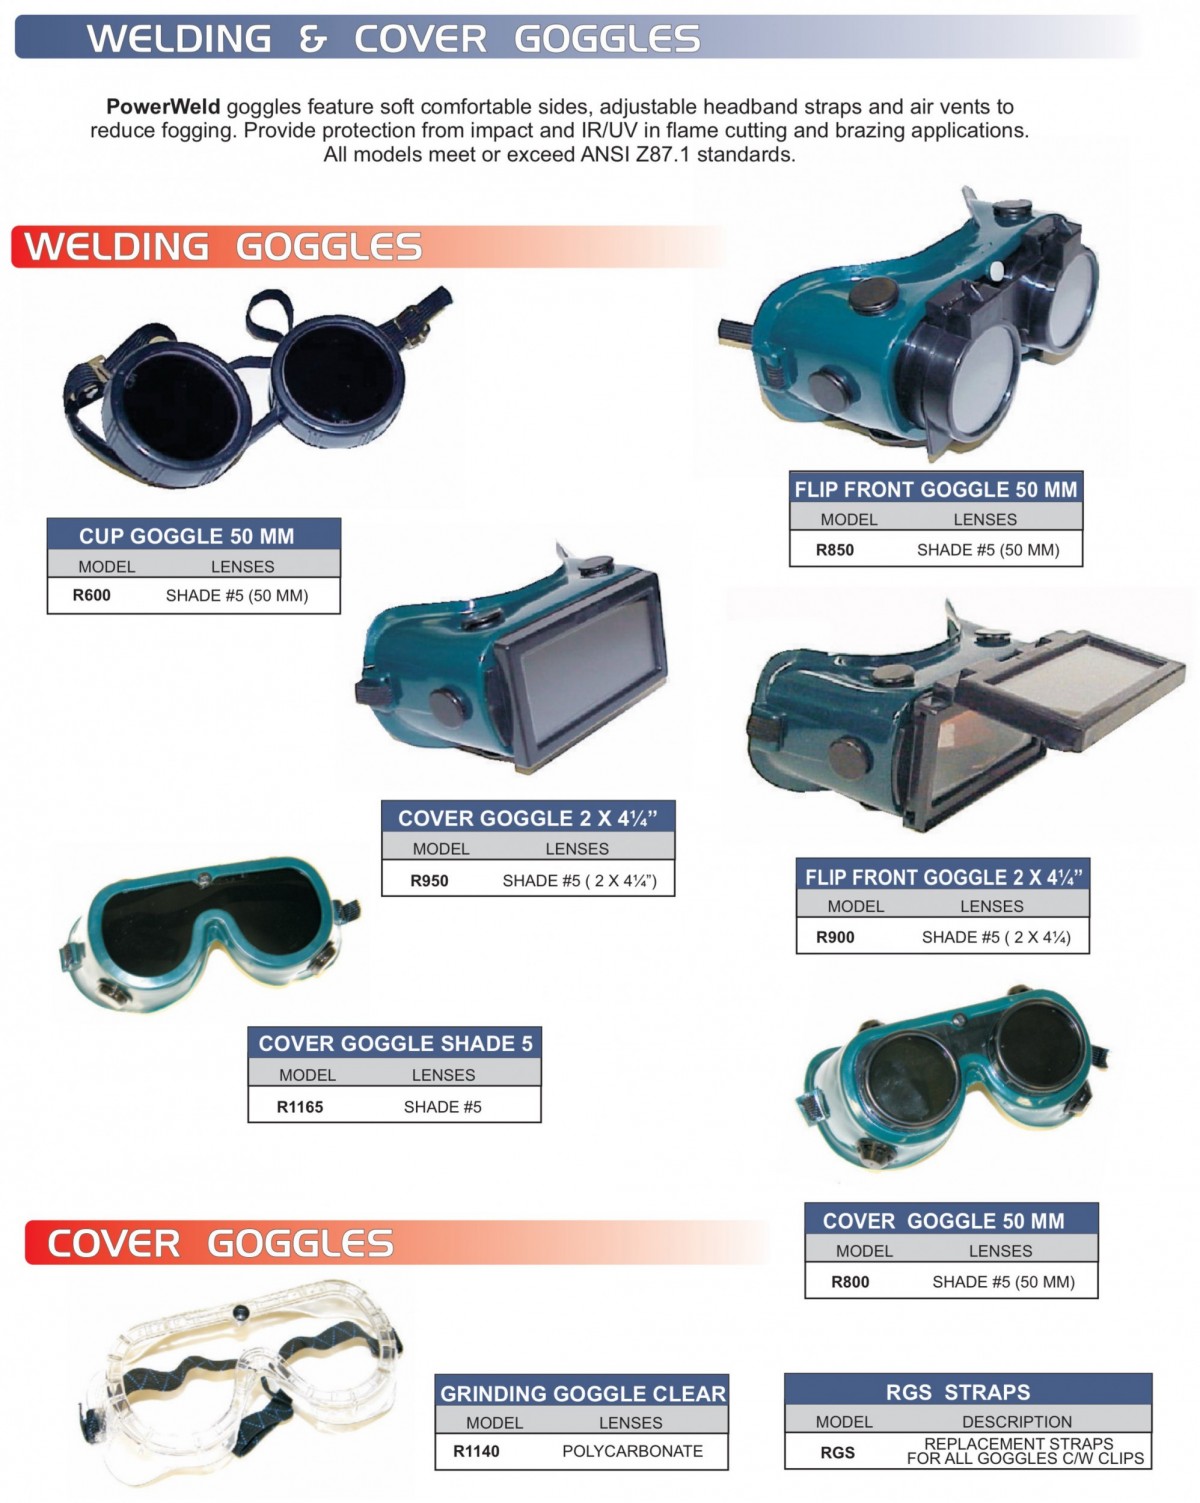 Welding & Cover Goggles